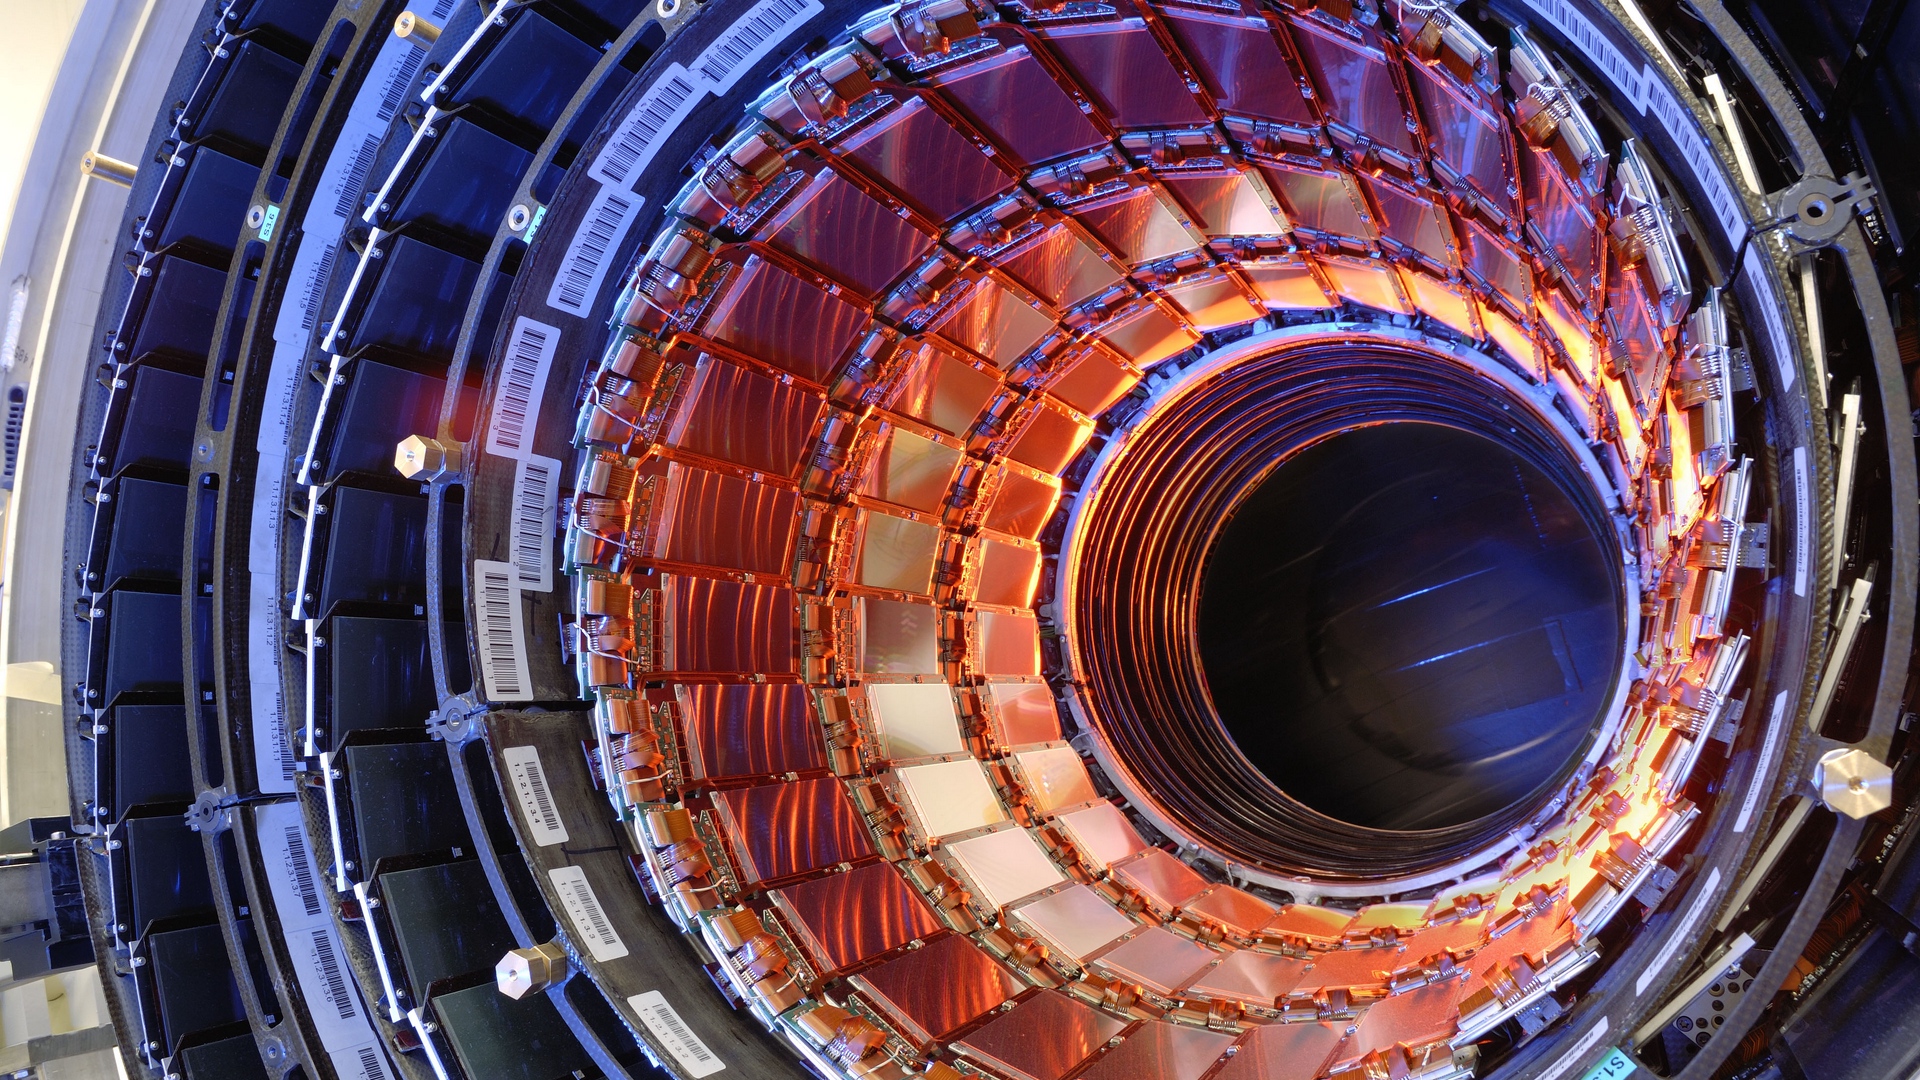 Download wallpaper 1920x1080 hadron collider, accelerator, particles